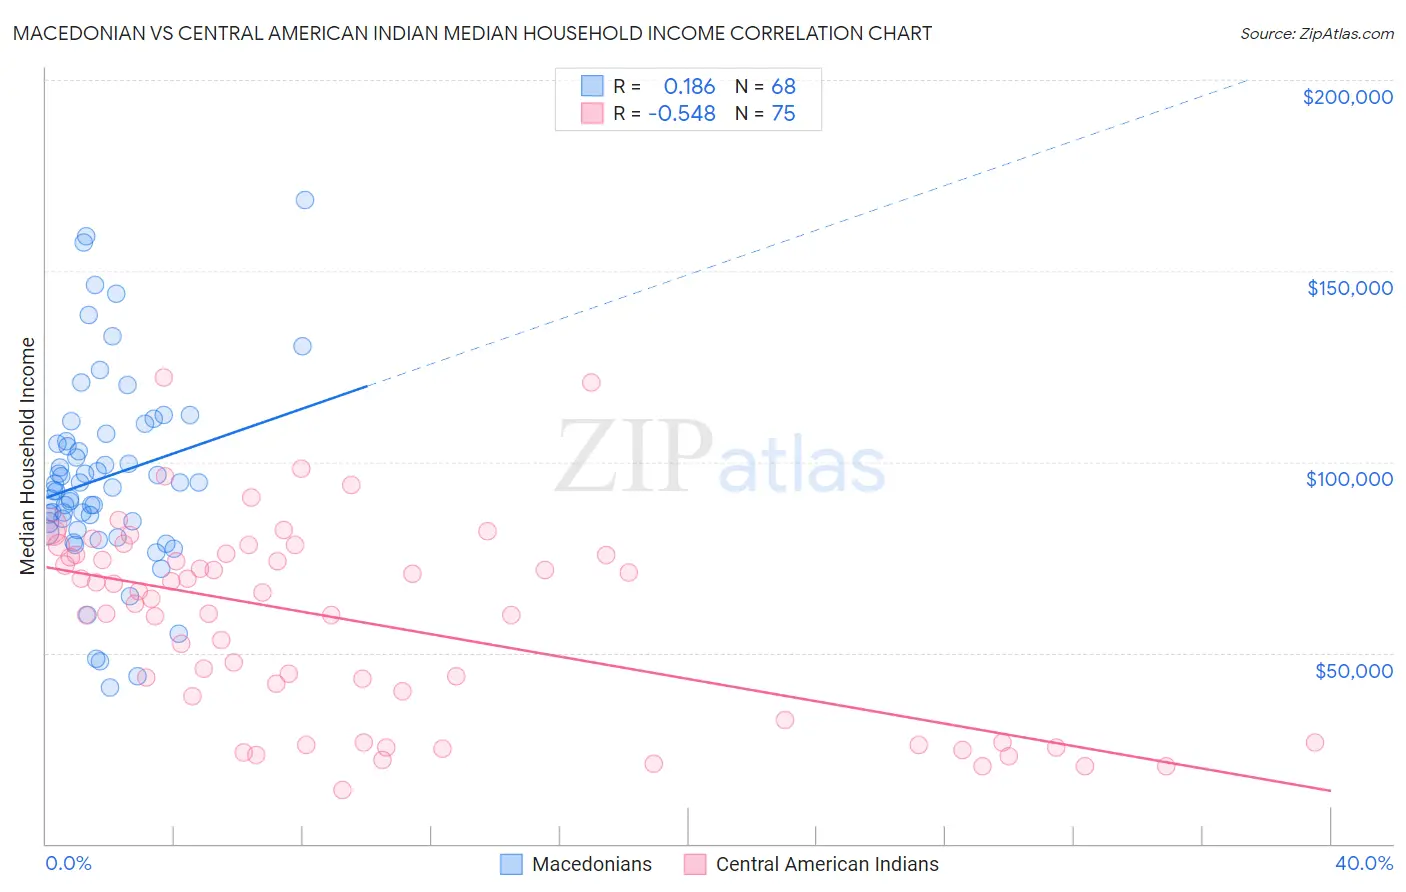 Macedonian vs Central American Indian Median Household Income